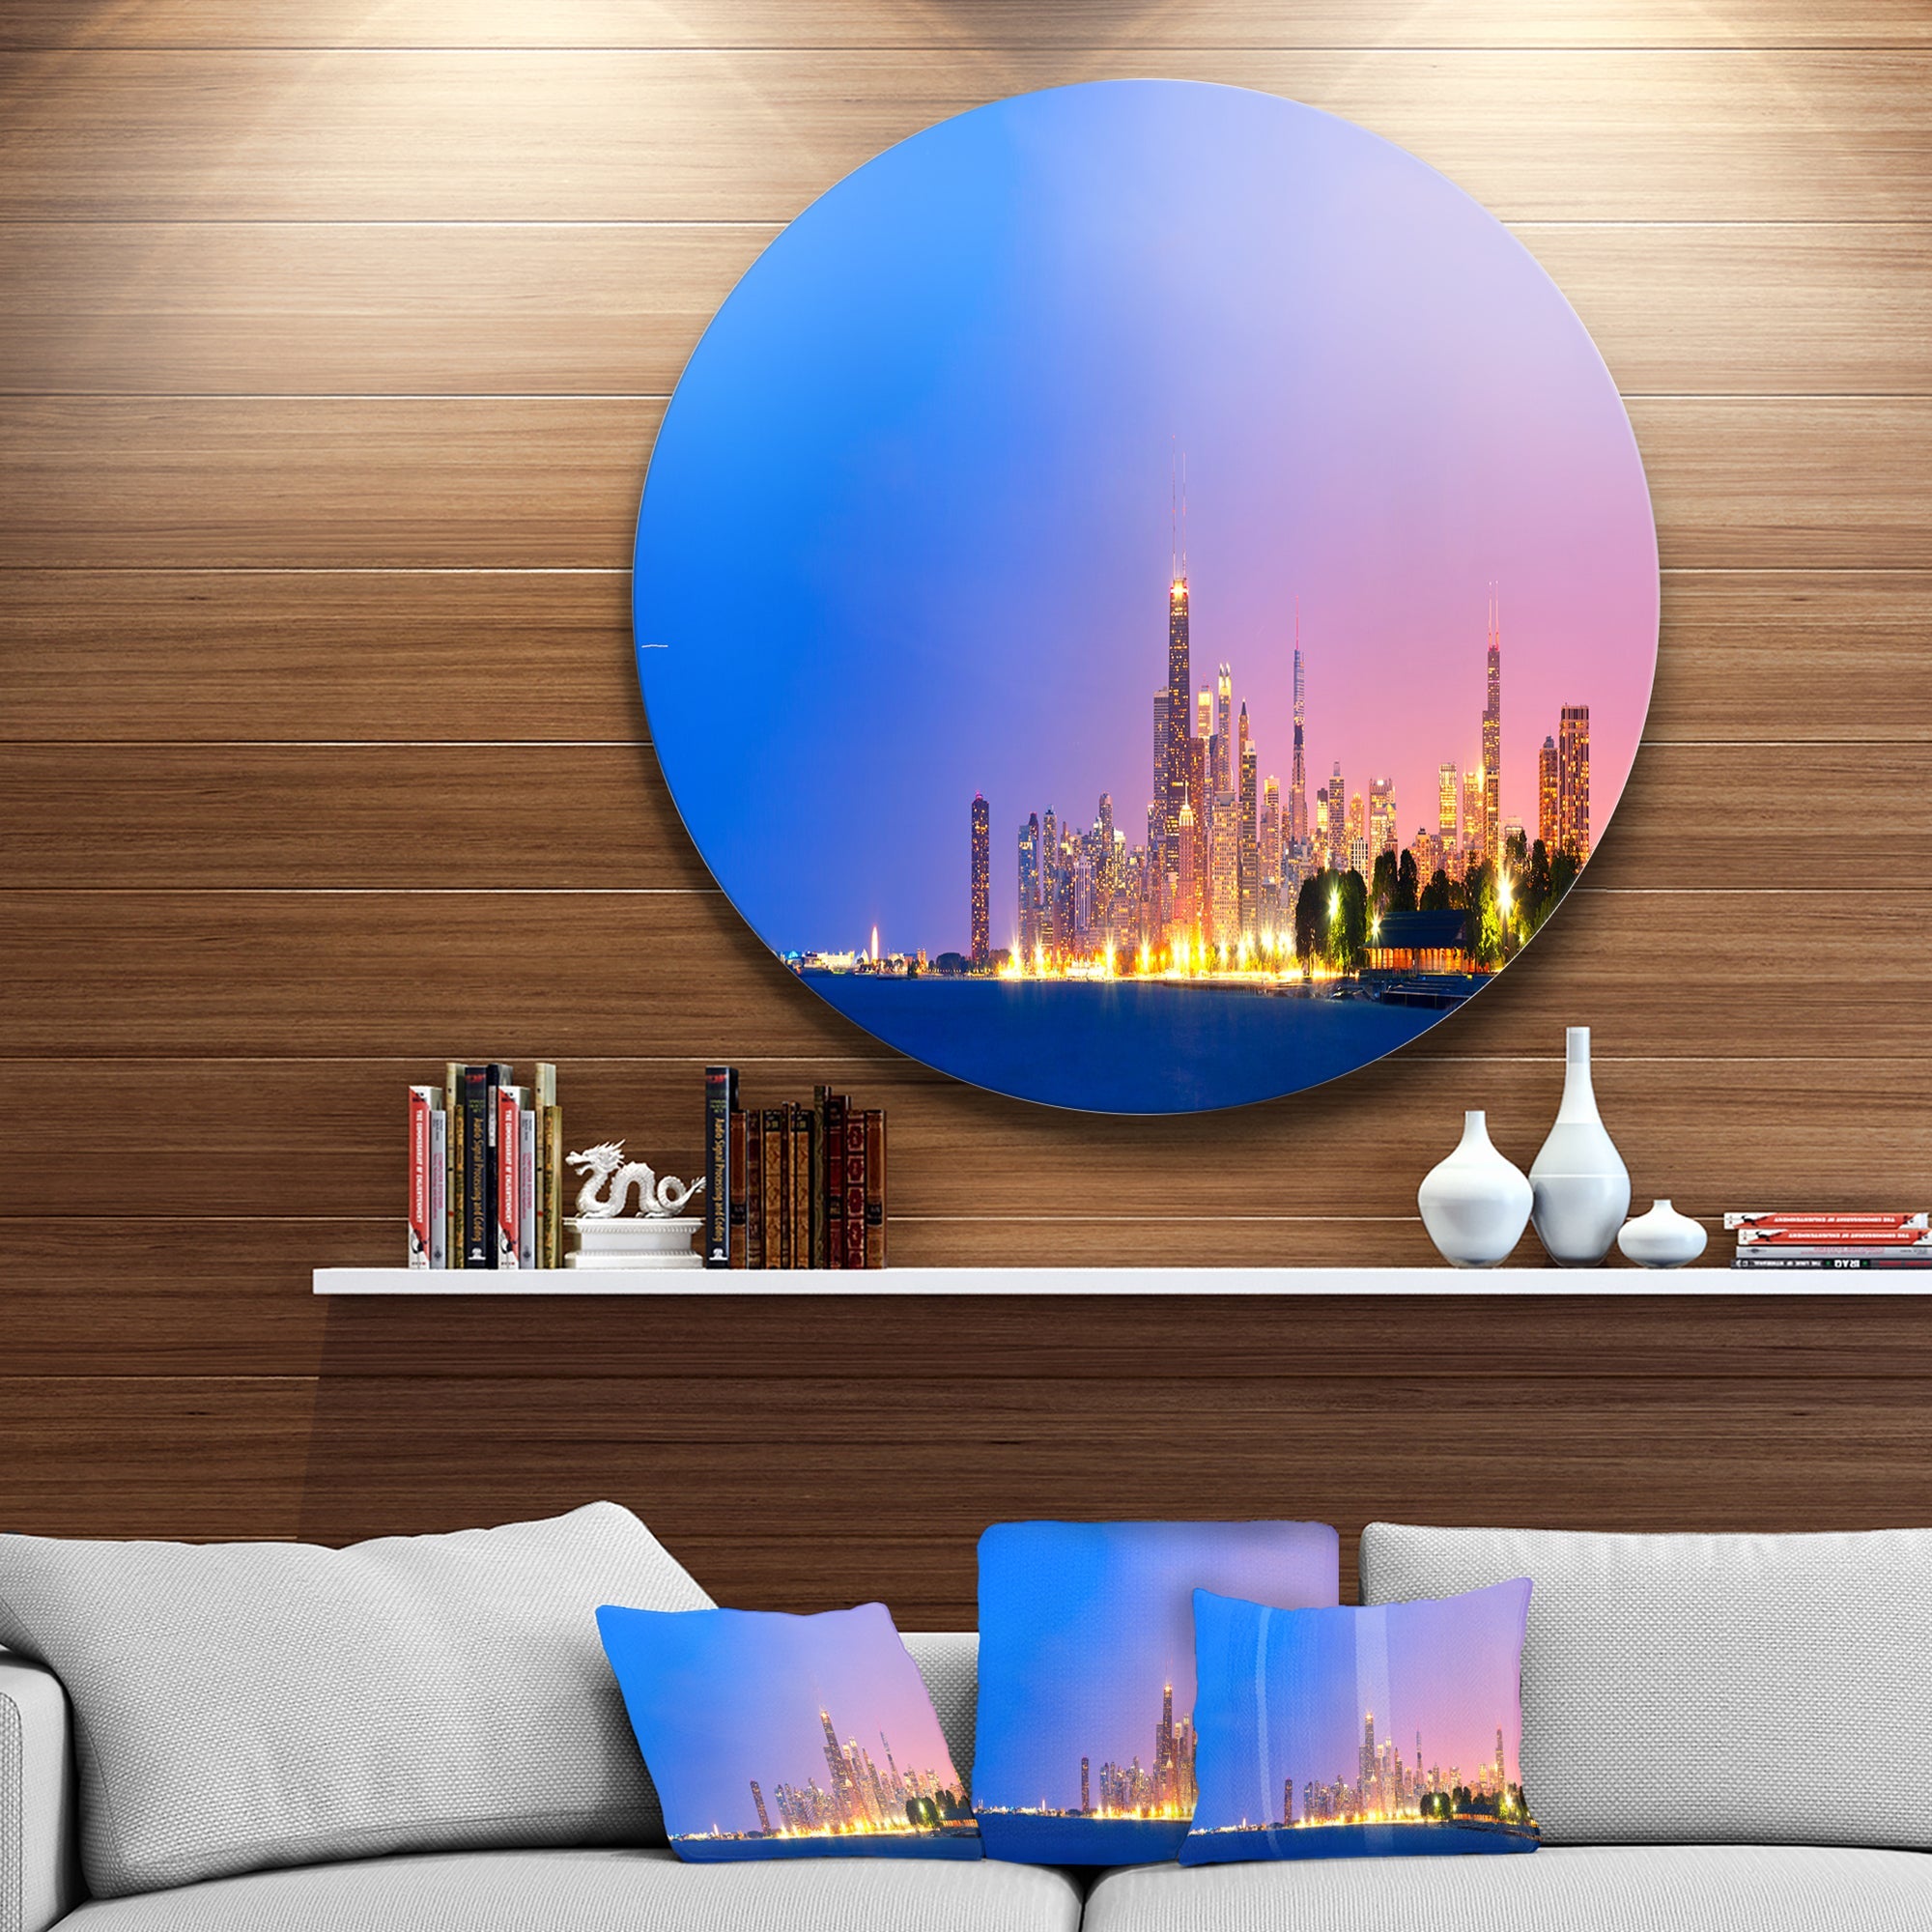 City of Chicago Skyline Disc Cityscape Photo Circle Metal Wall Art